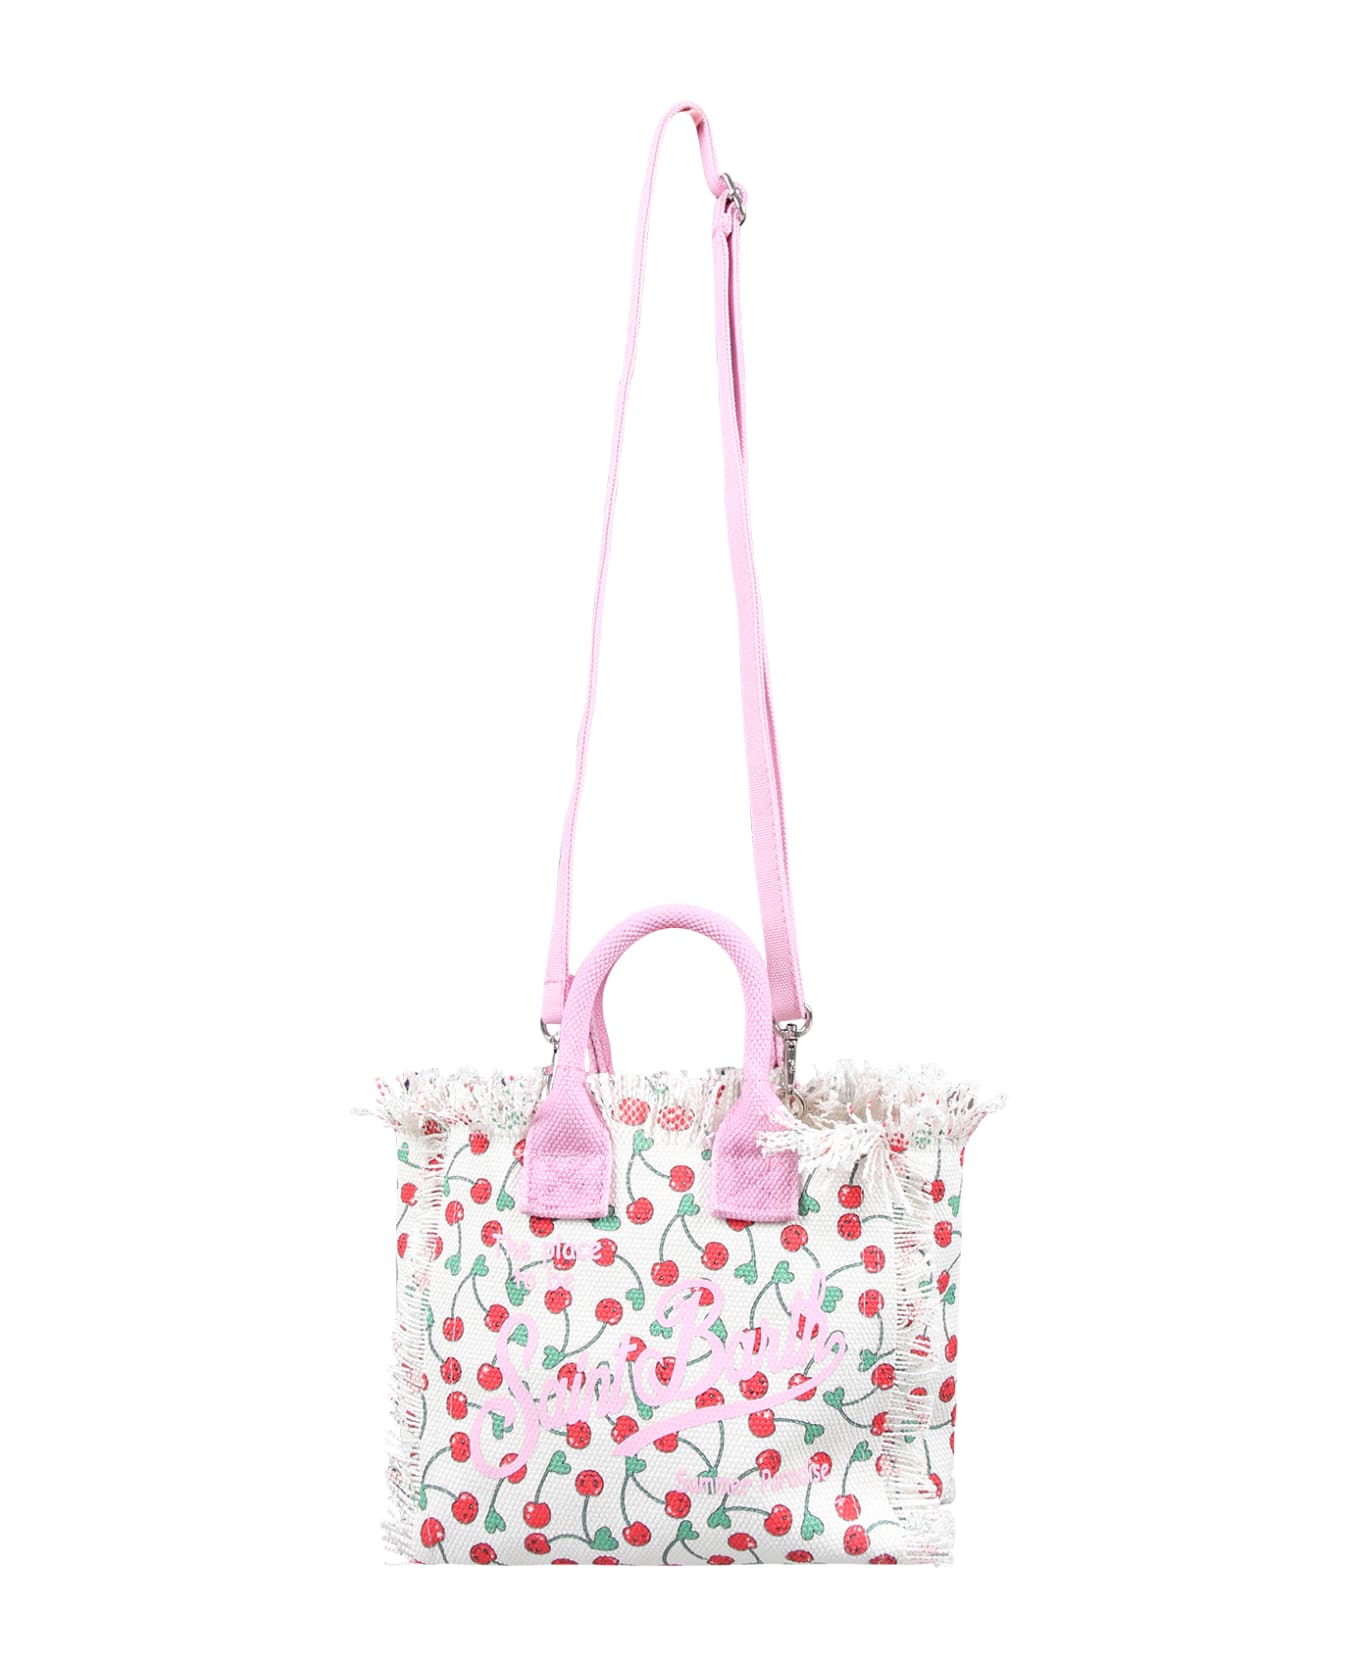 MC2 Saint Barth White Bag For Girl With Cherry Print And Logo - White アクセサリー＆ギフト